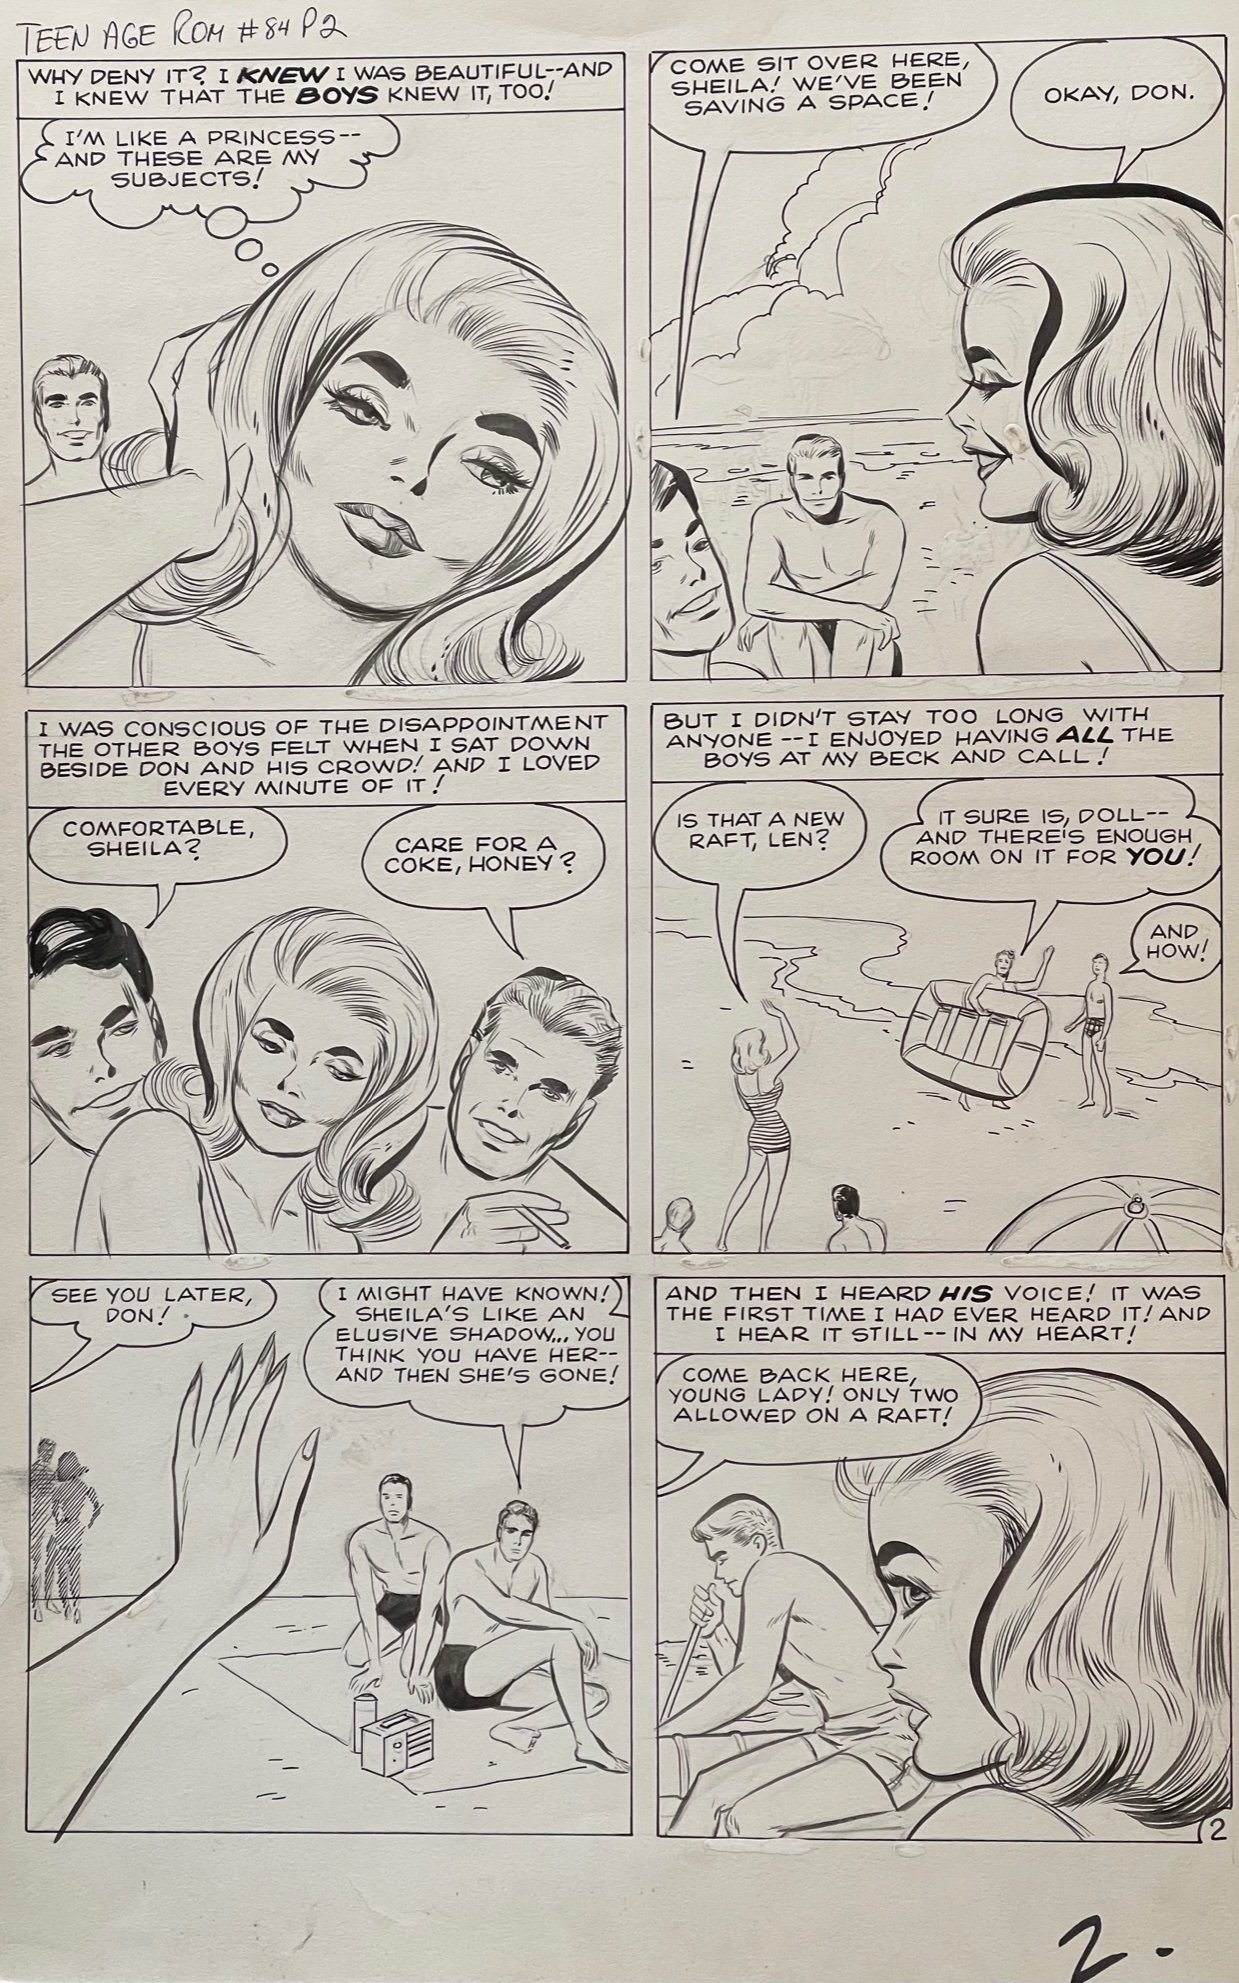 Jack Kirby Teenage Romance # 84 The Summer Must End Page 2, in David ...